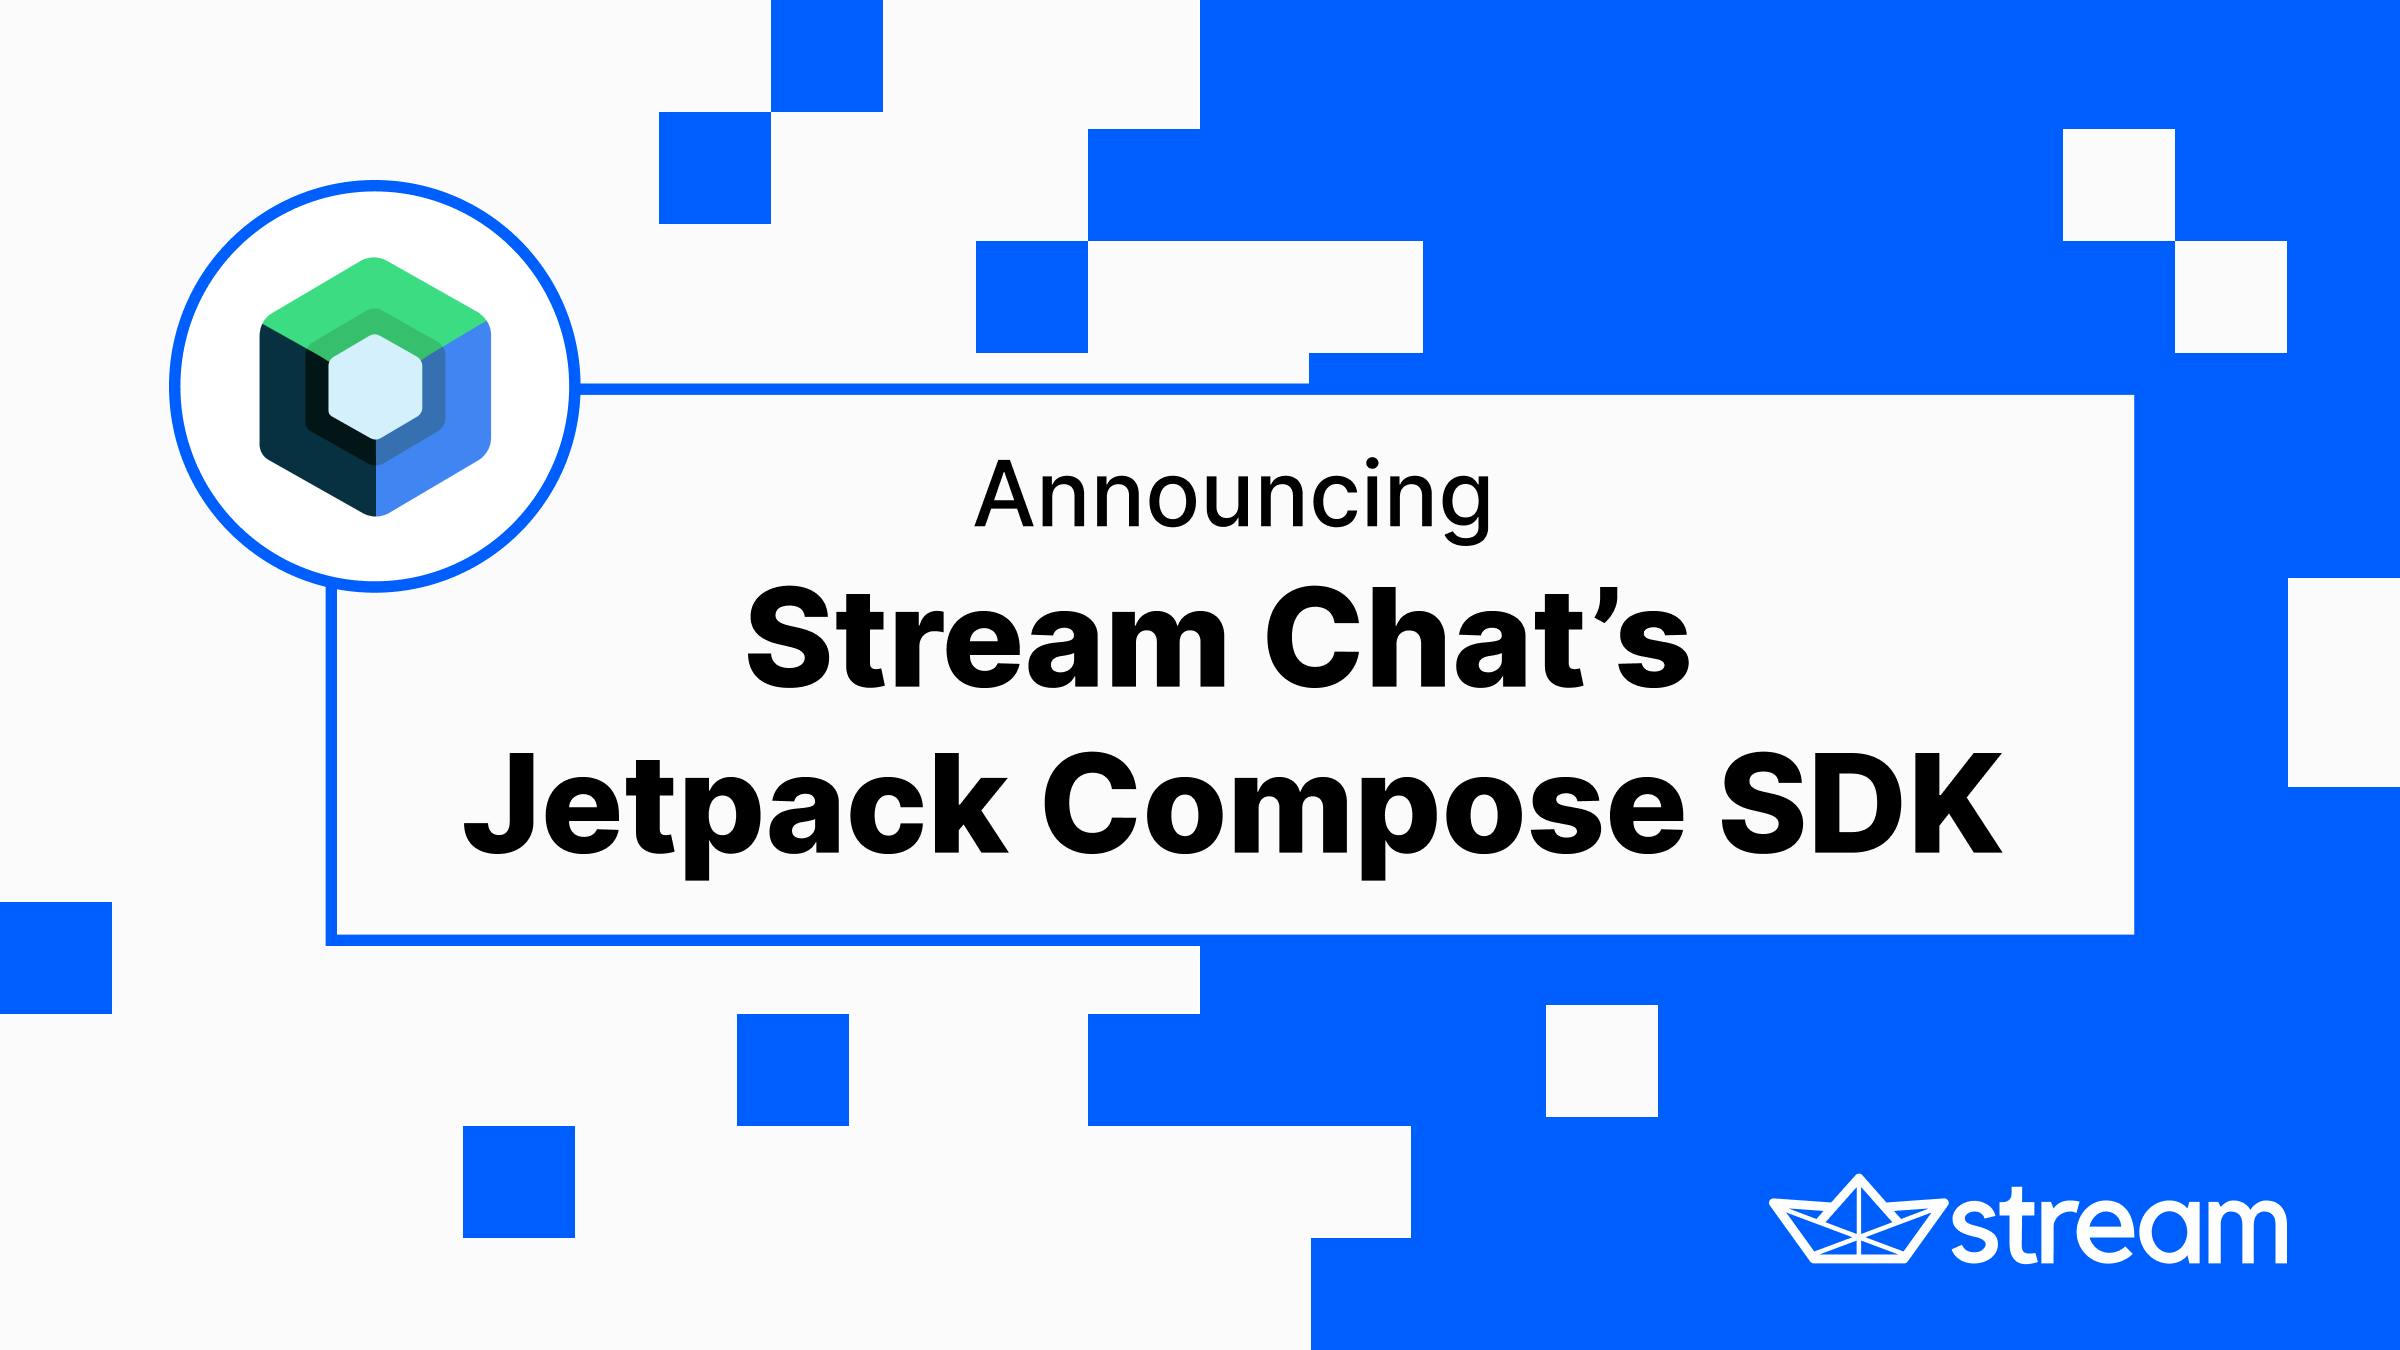 Jetpack Compoe -10- Android Notification, Jetpack Compose Tutorials